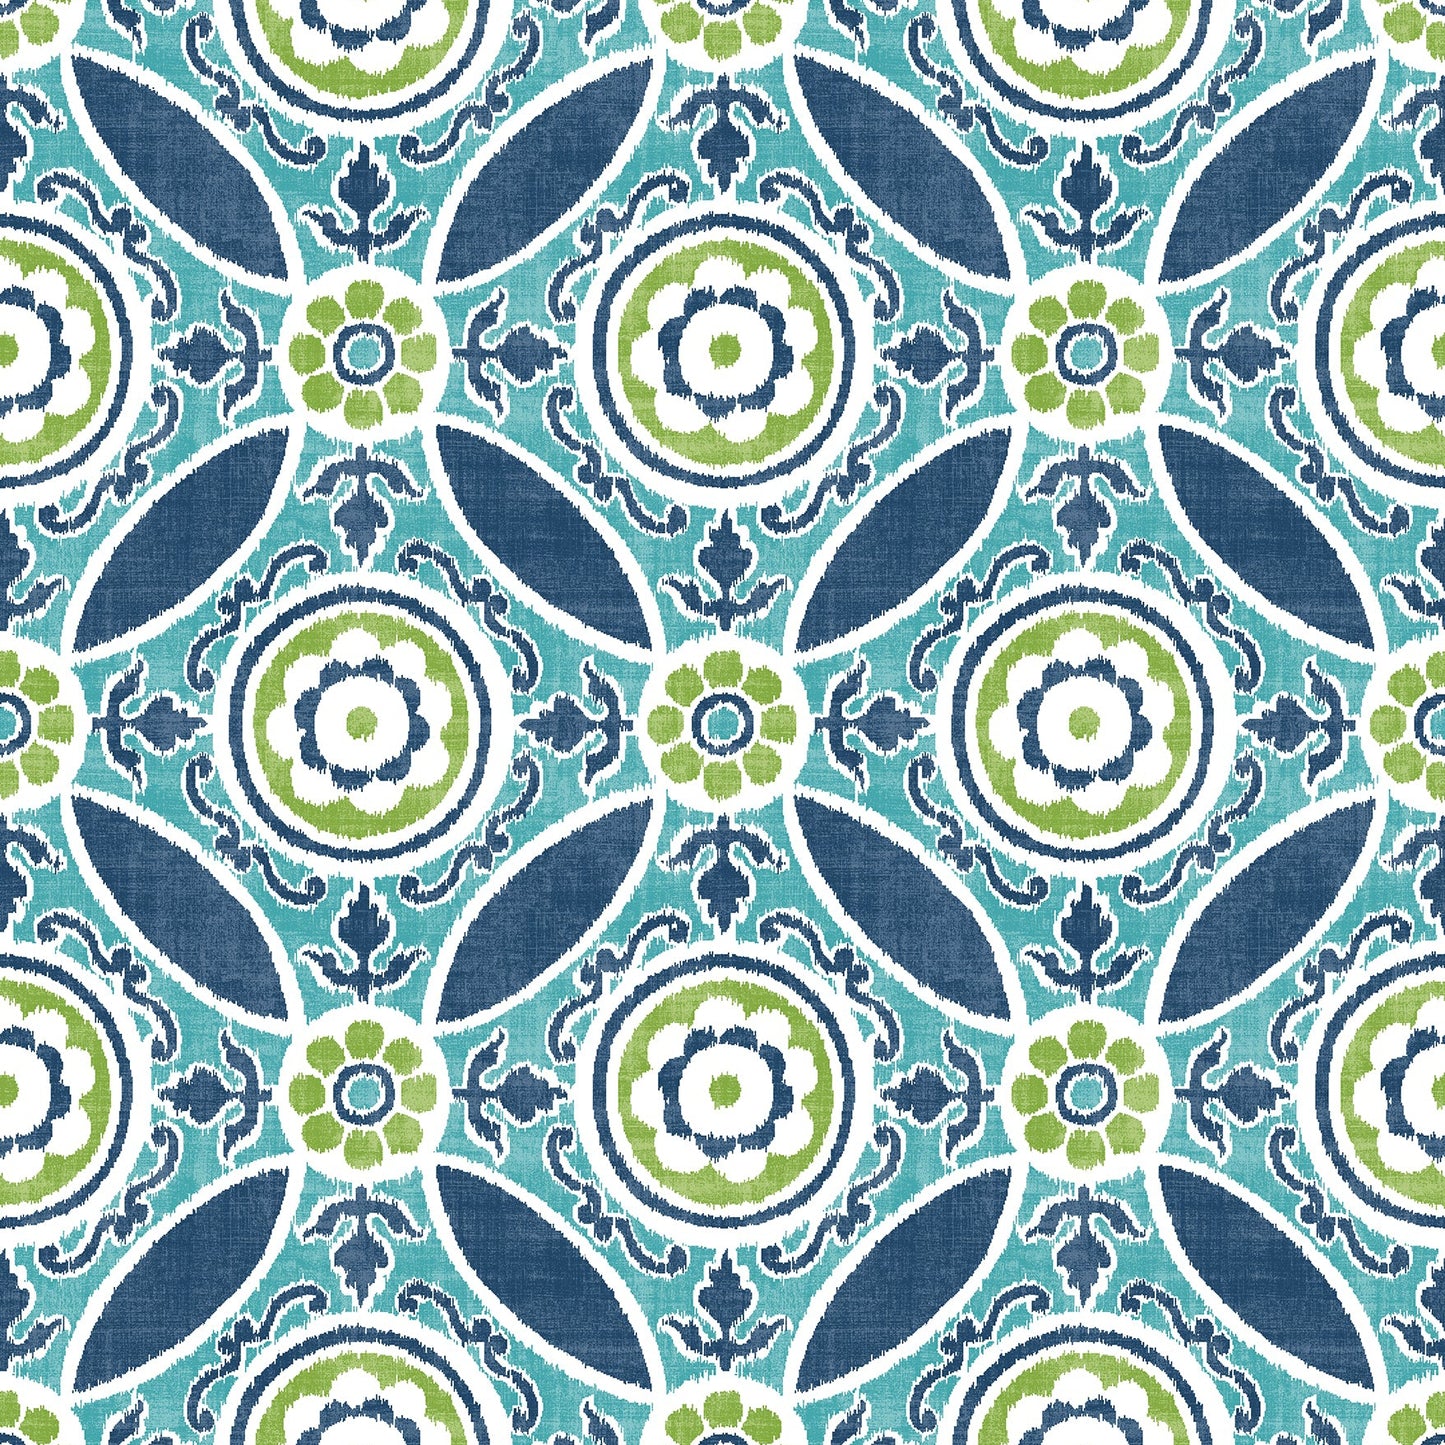 Looking for 2744-24115 Solstice Teal Flowers A-Street Prints Wallpaper